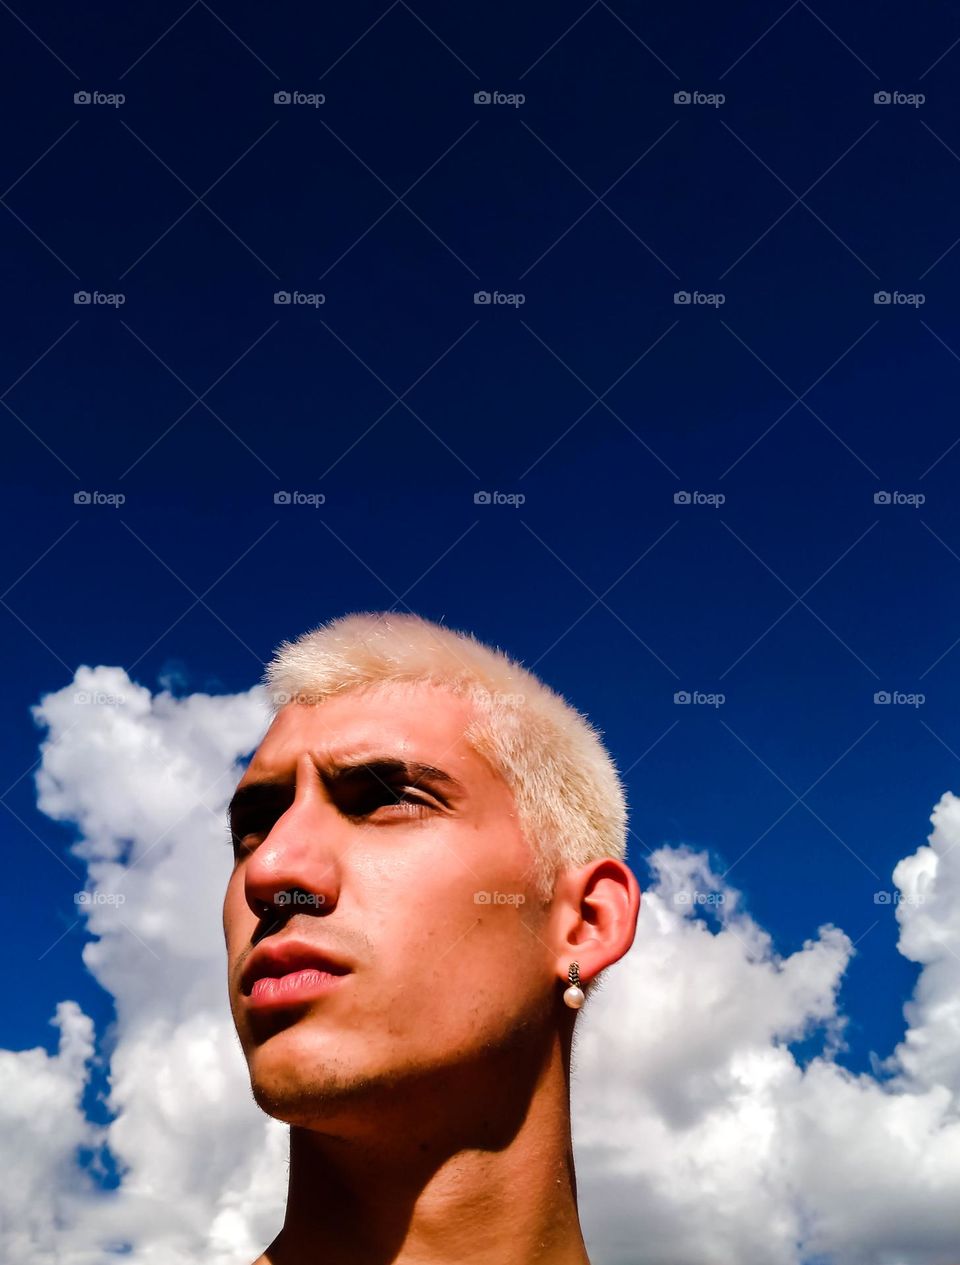 eautiful Selfie Portrait of a blonde man, with an earring, with a gorgeous blue sky and fluffy white clouds on the background